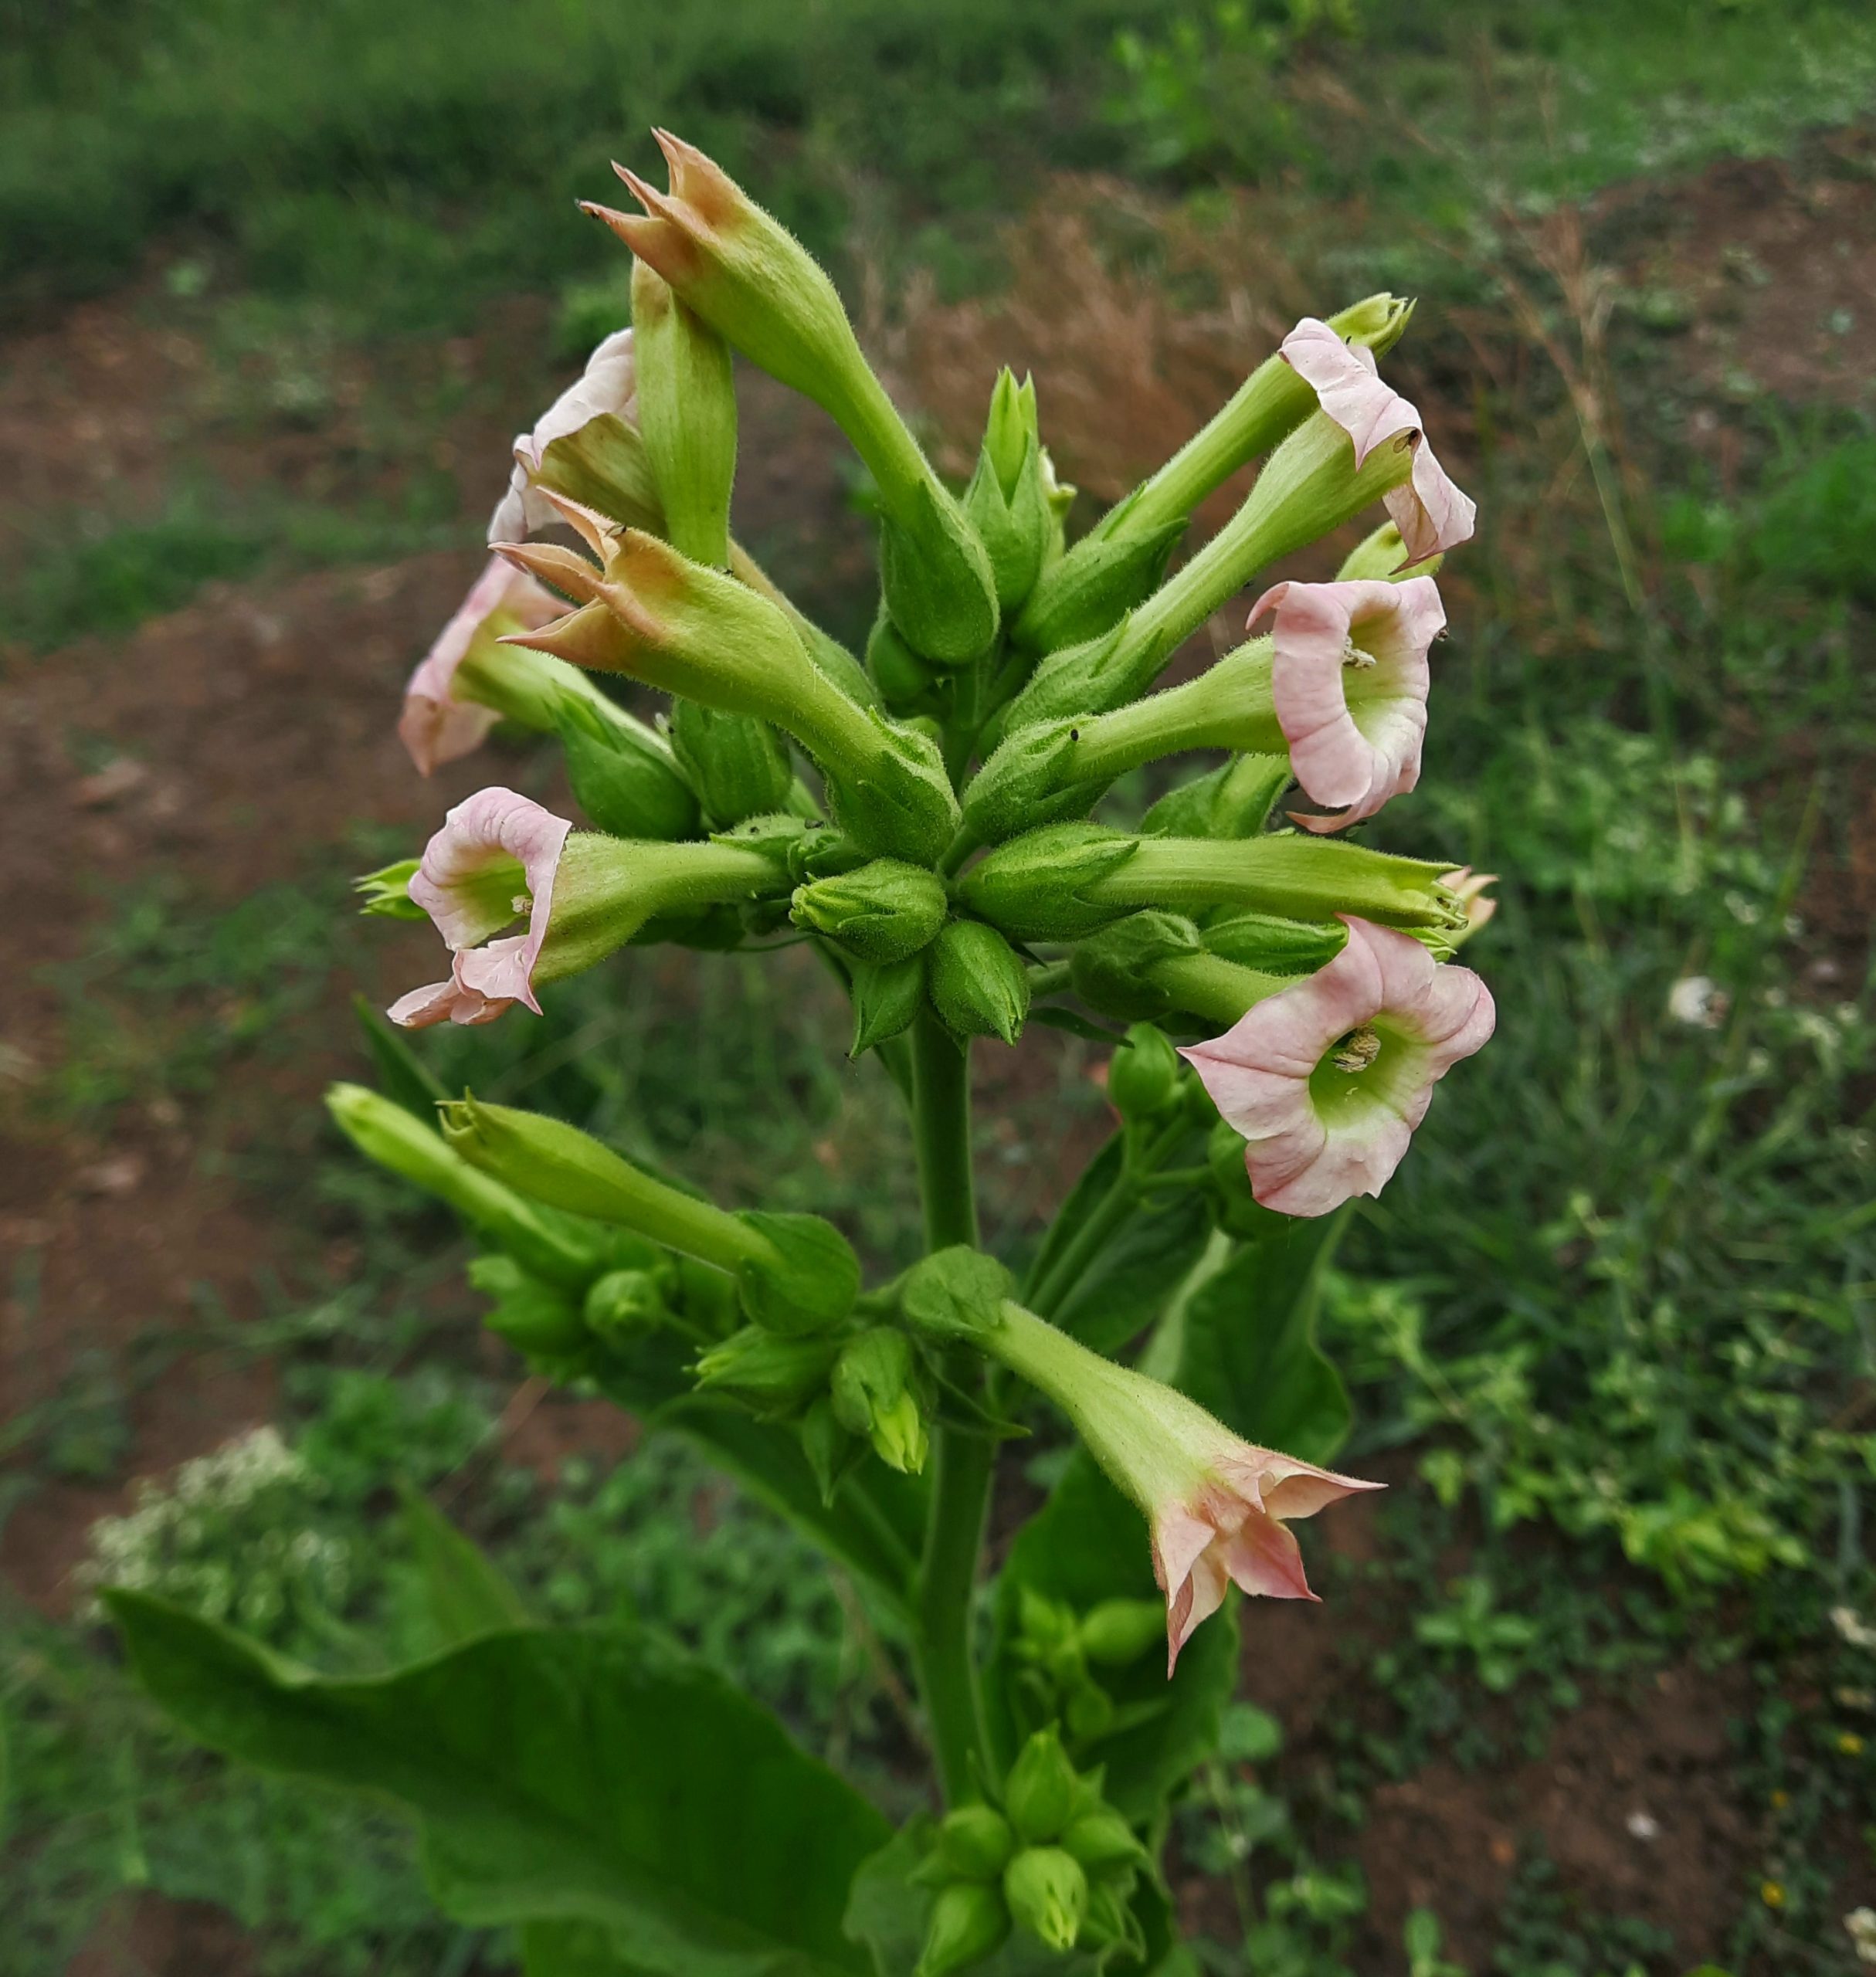 Buds and flowers of a plant